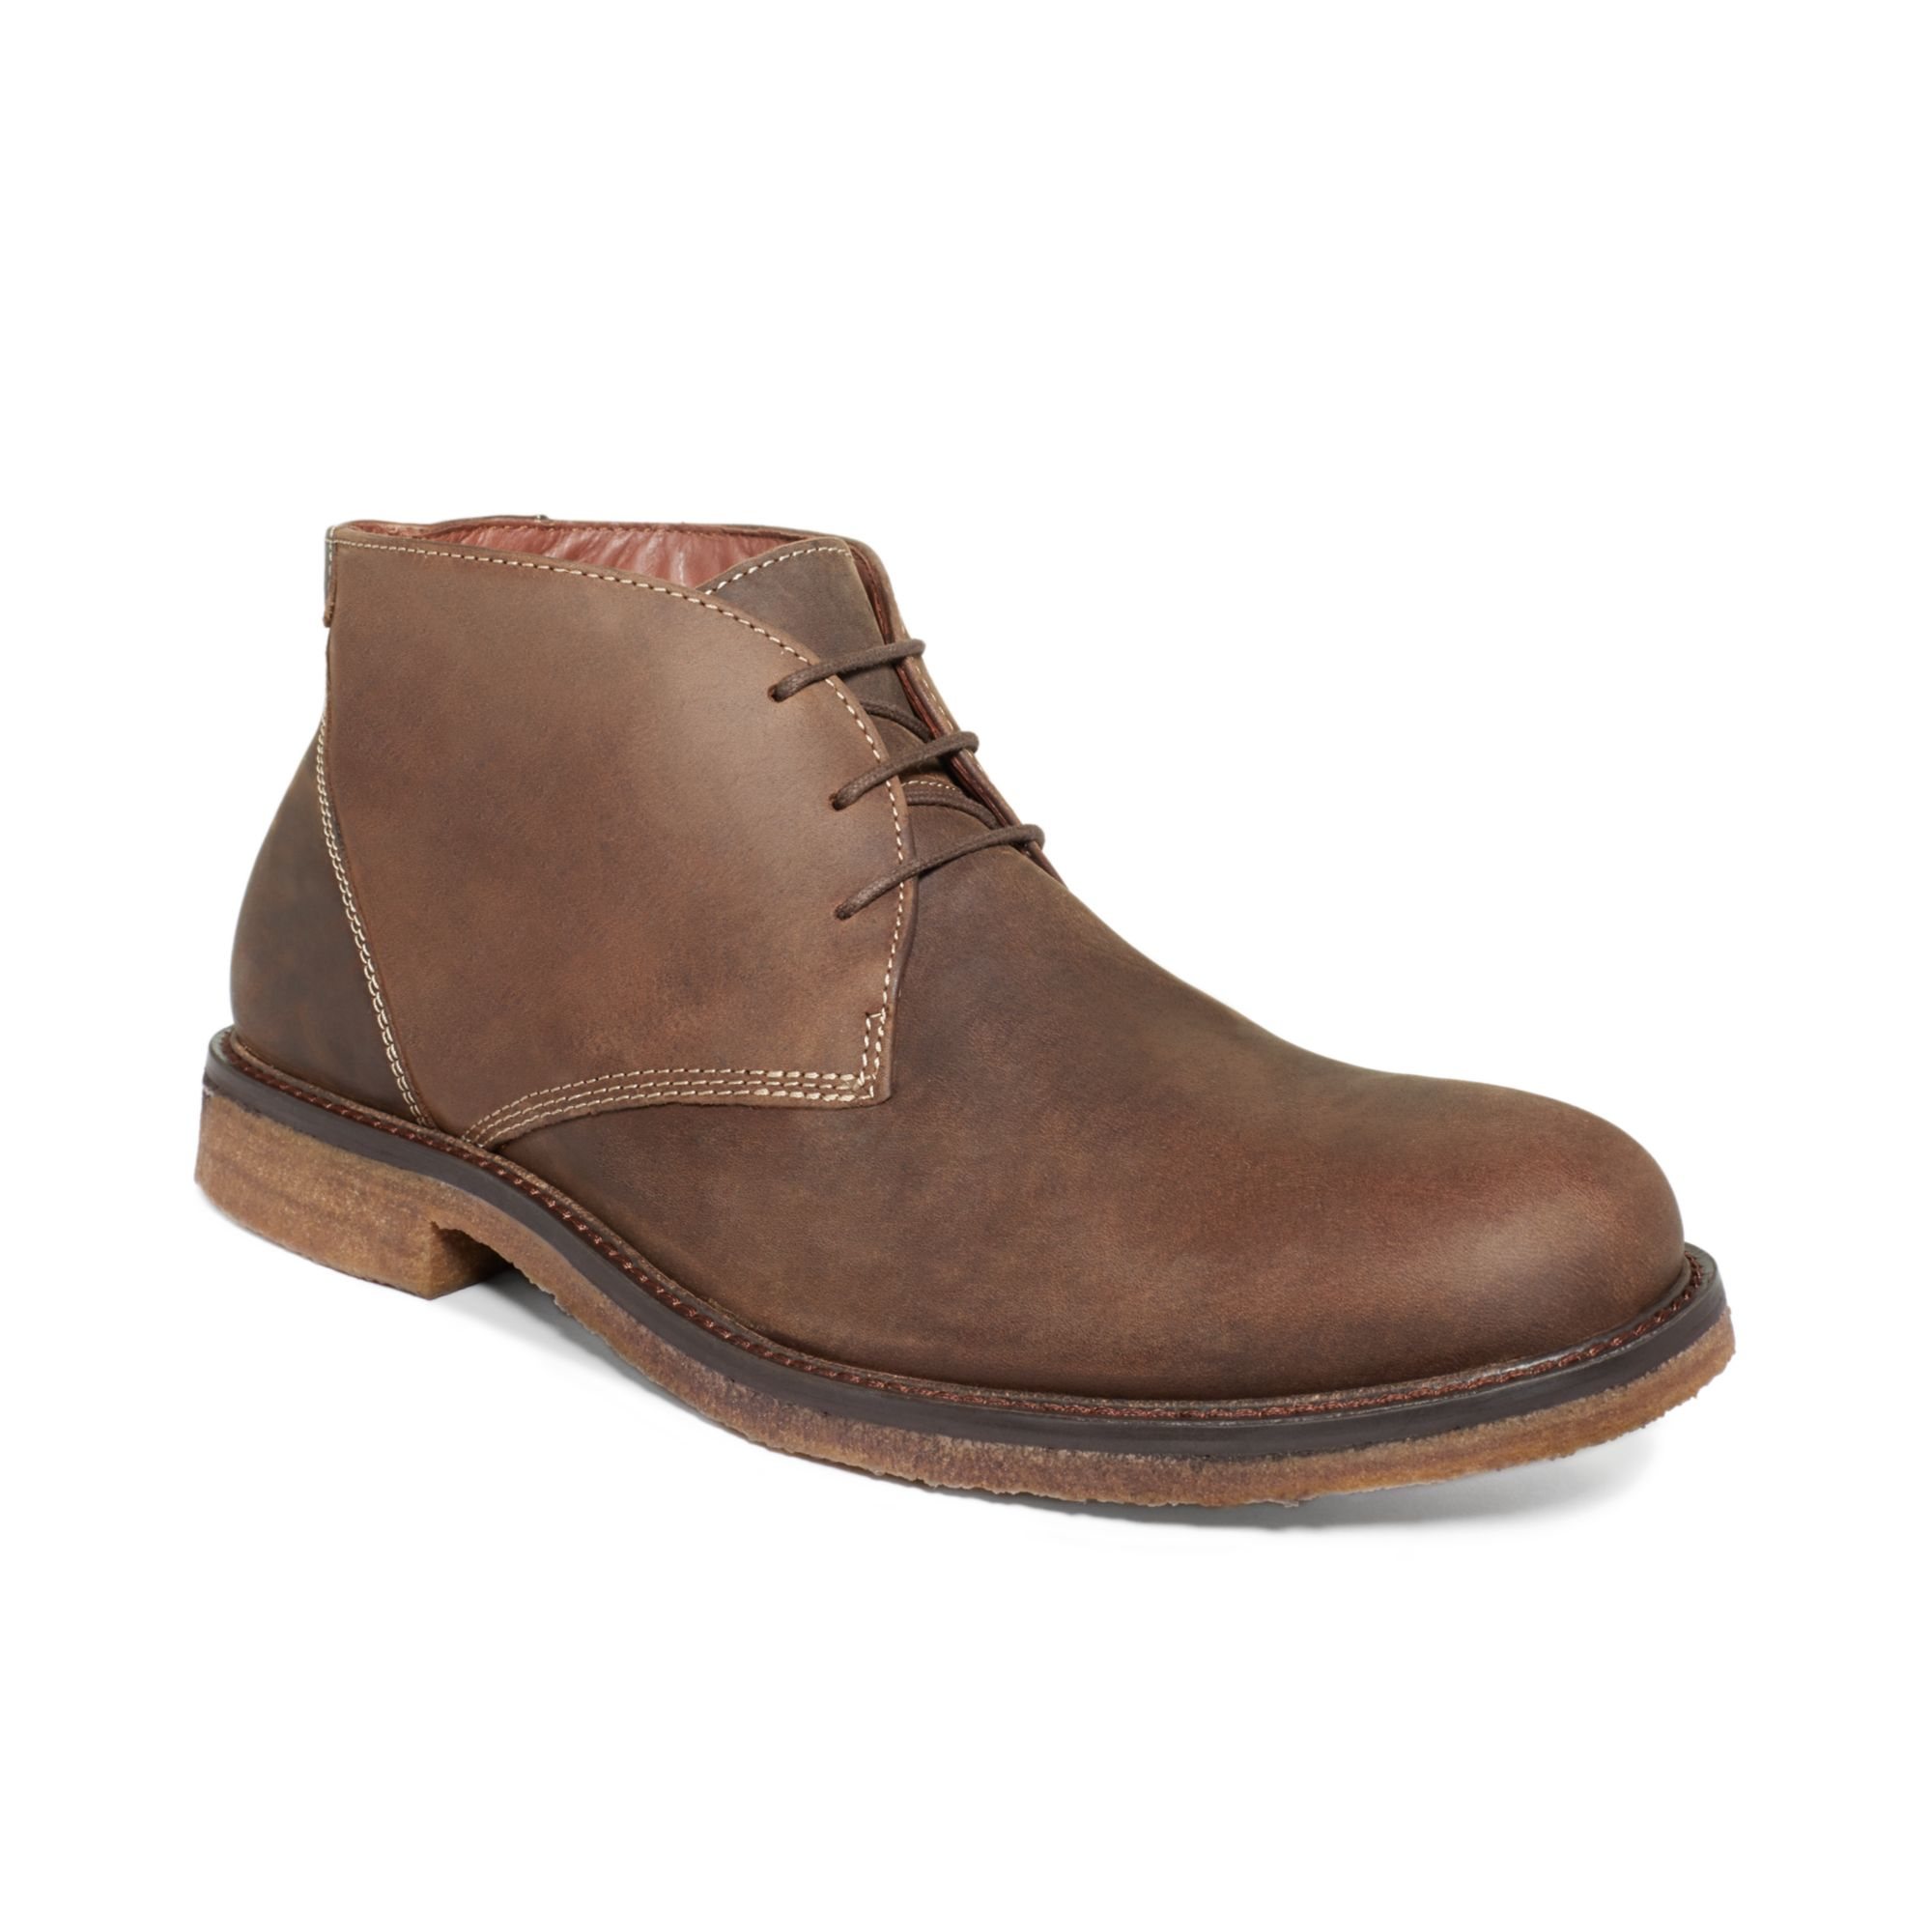 Johnston  Murphy Copeland Suede Chukka Boots in Brown for Men (Tan ...